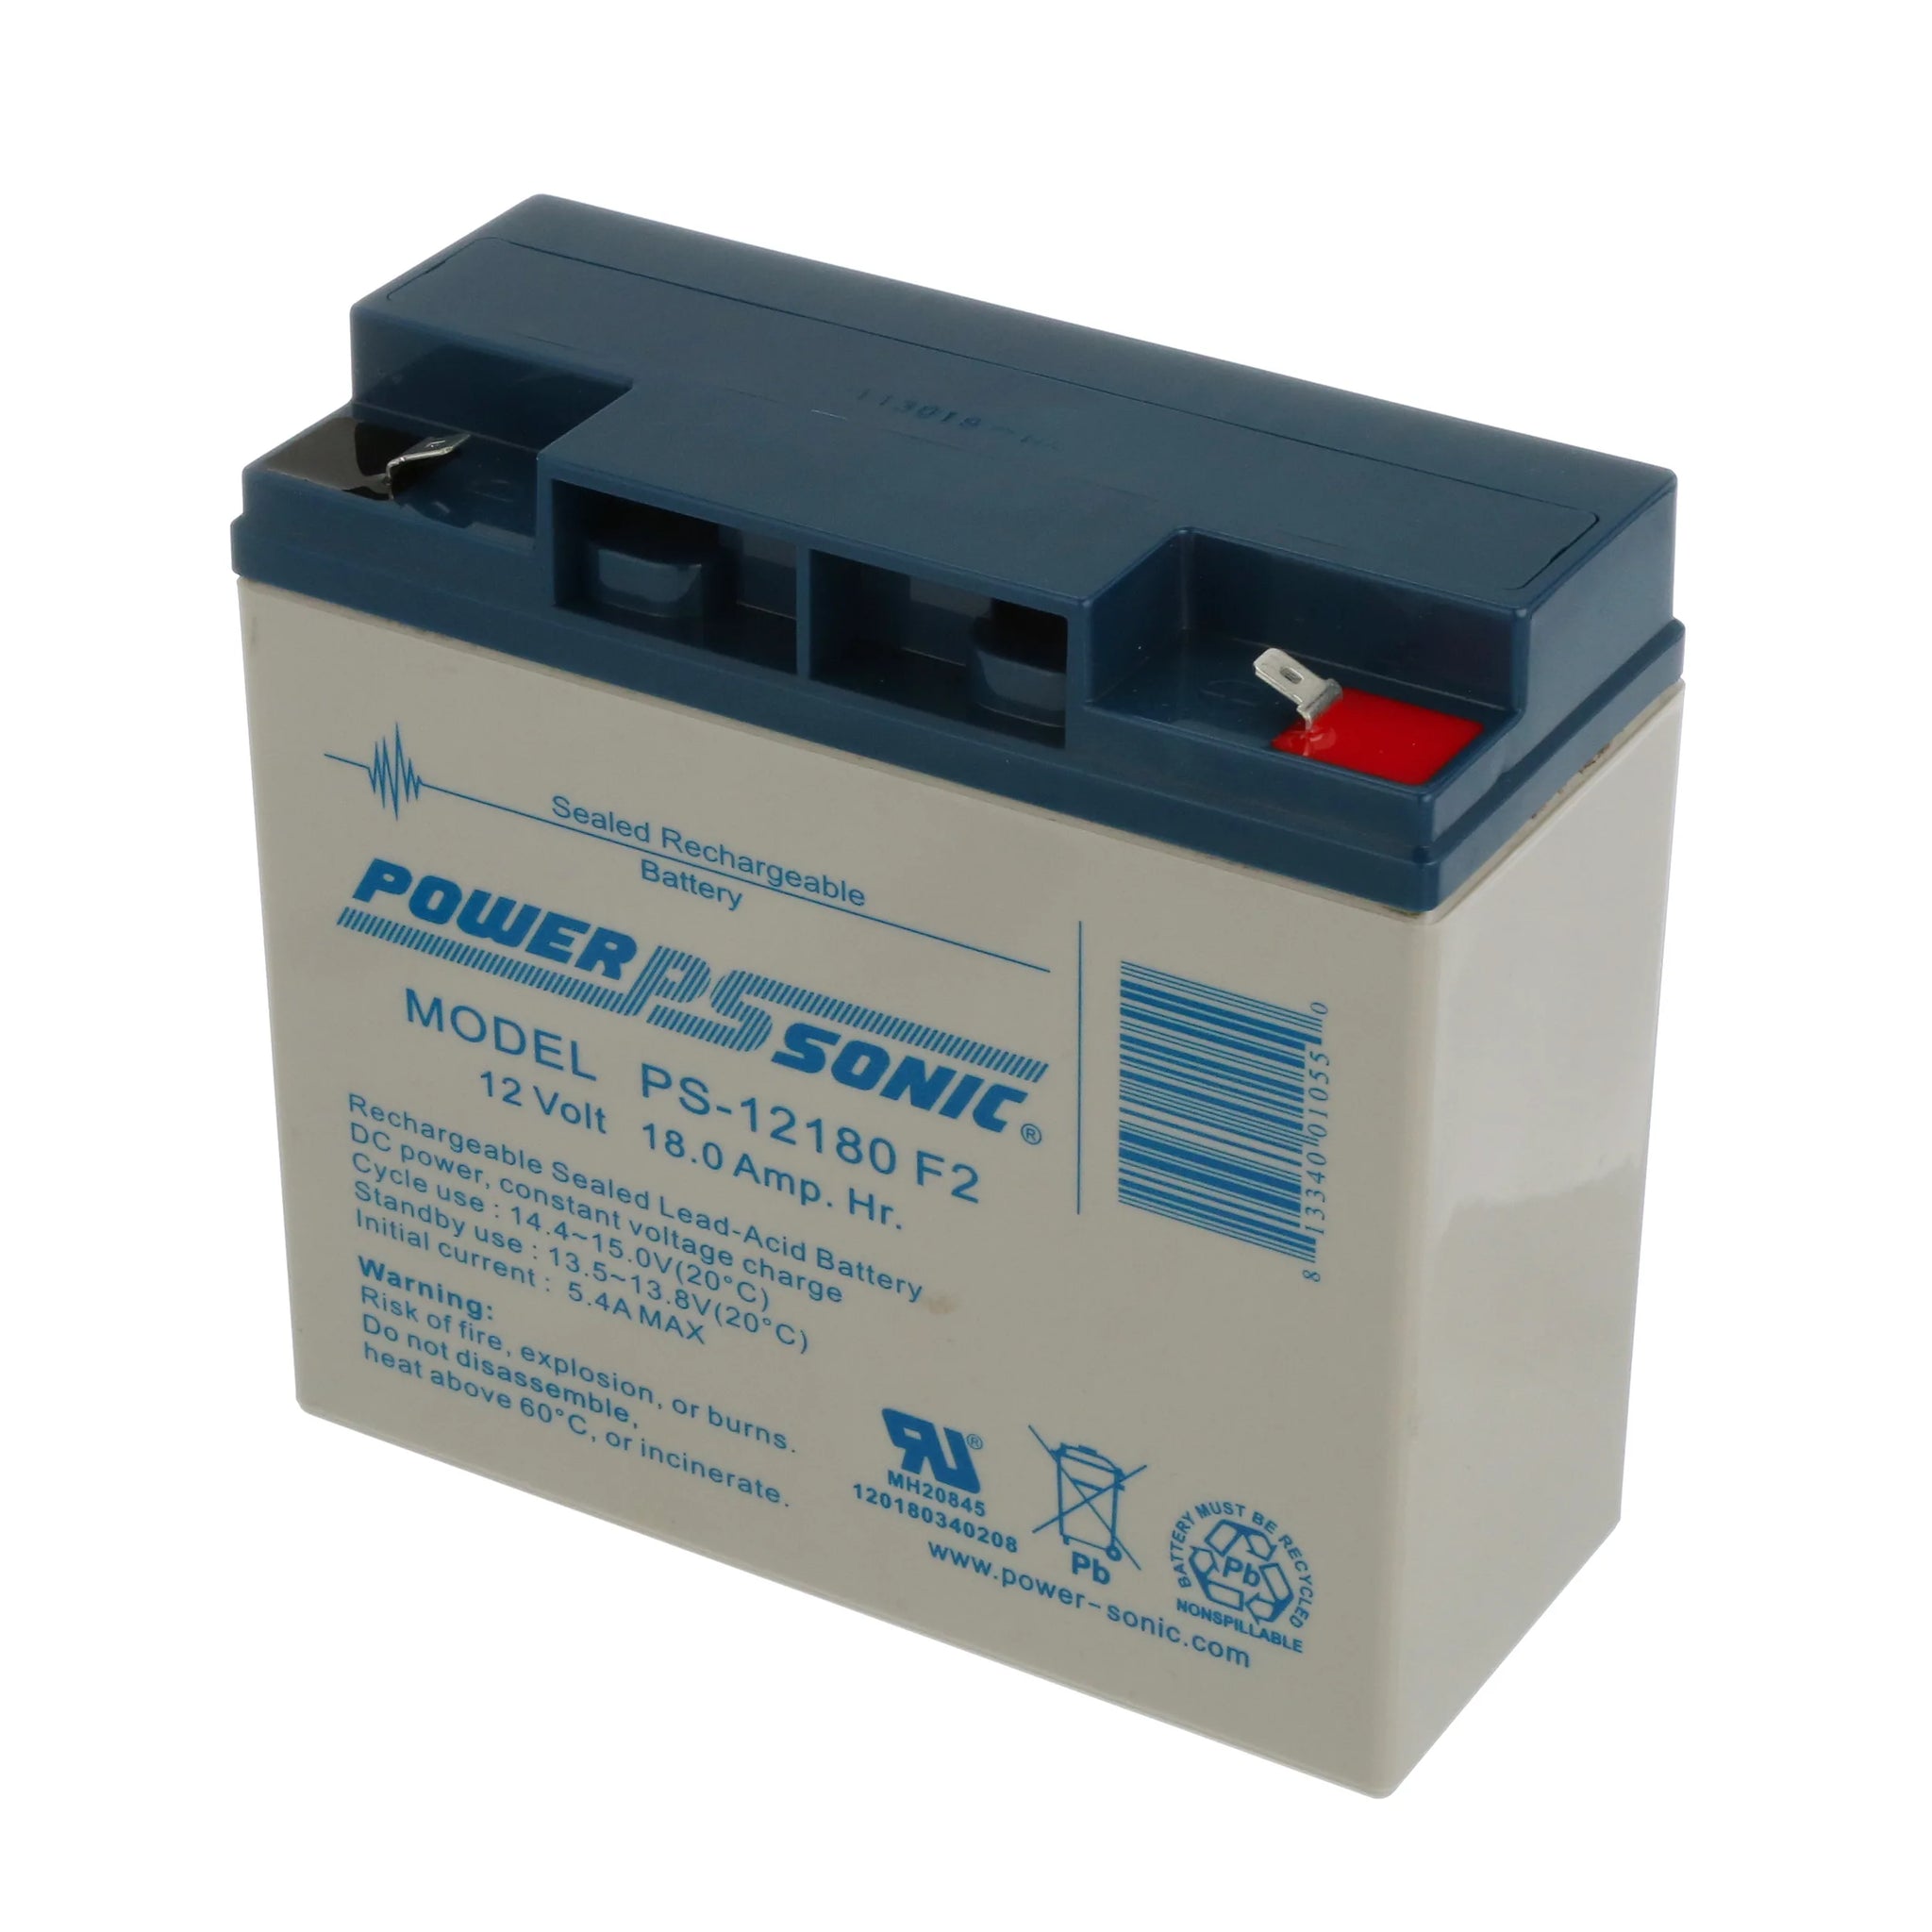 Power Sonic PS-12180F2 Rechargeable Sealed Lead Acid Battery